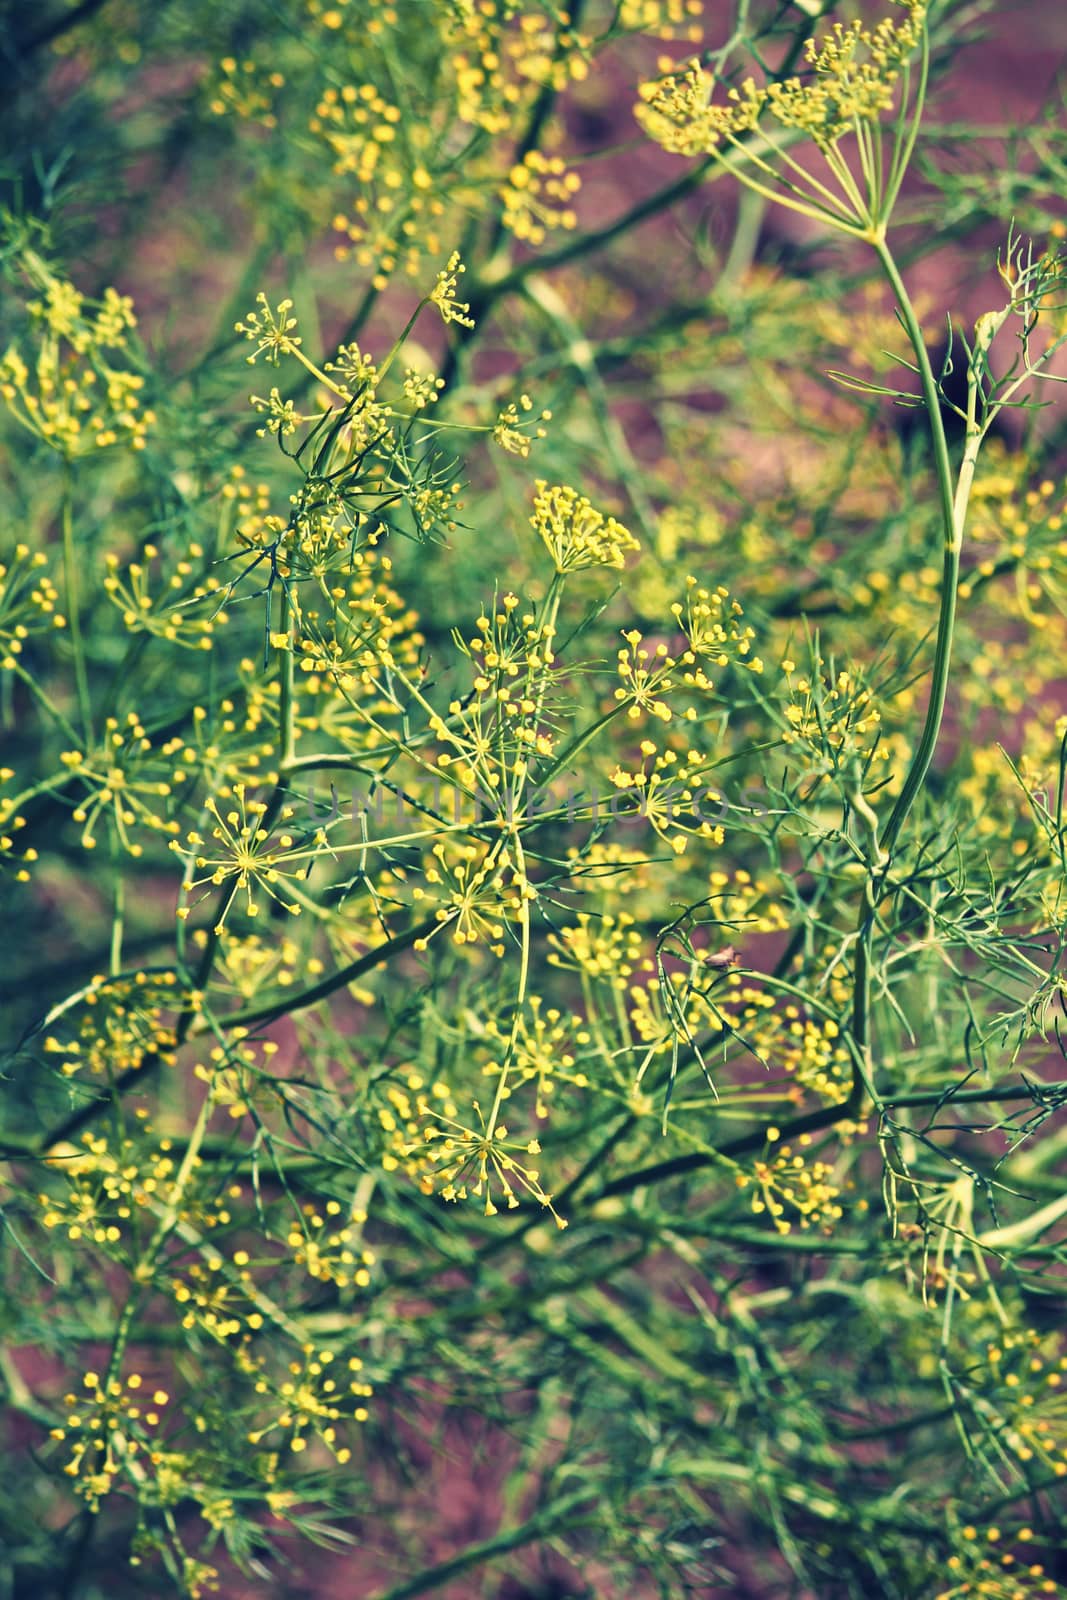 Fennel, Foeniculum vulgare is a flowering plant species in the celery family Apiaceae or Umbelliferae. It is a hardy, perennial herb with yellow flowers and feathery leaves. It is a highly aromatic and flavorful herb with culinary and medicinal uses. Fennel is used as a food plant.